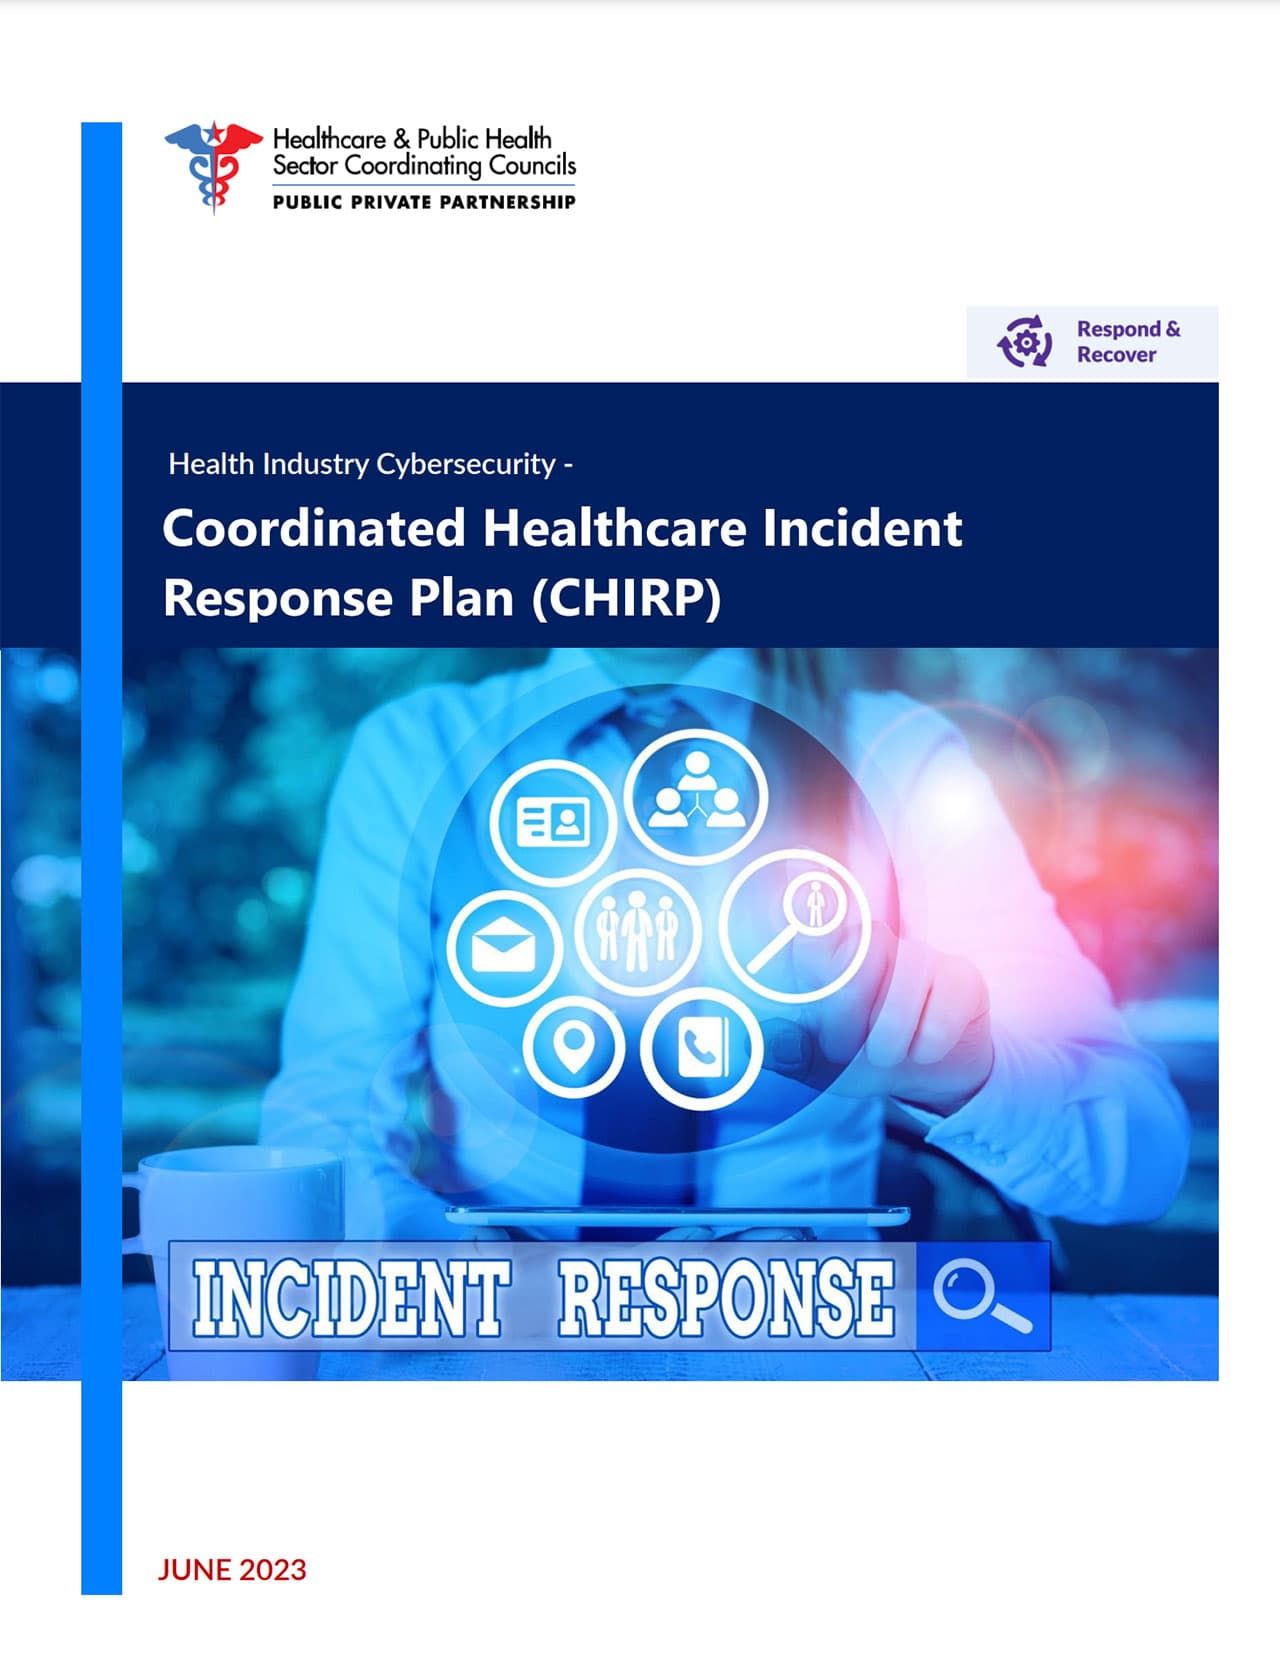 Coordinated Healthcare Incident Response Plan (CHIRP)